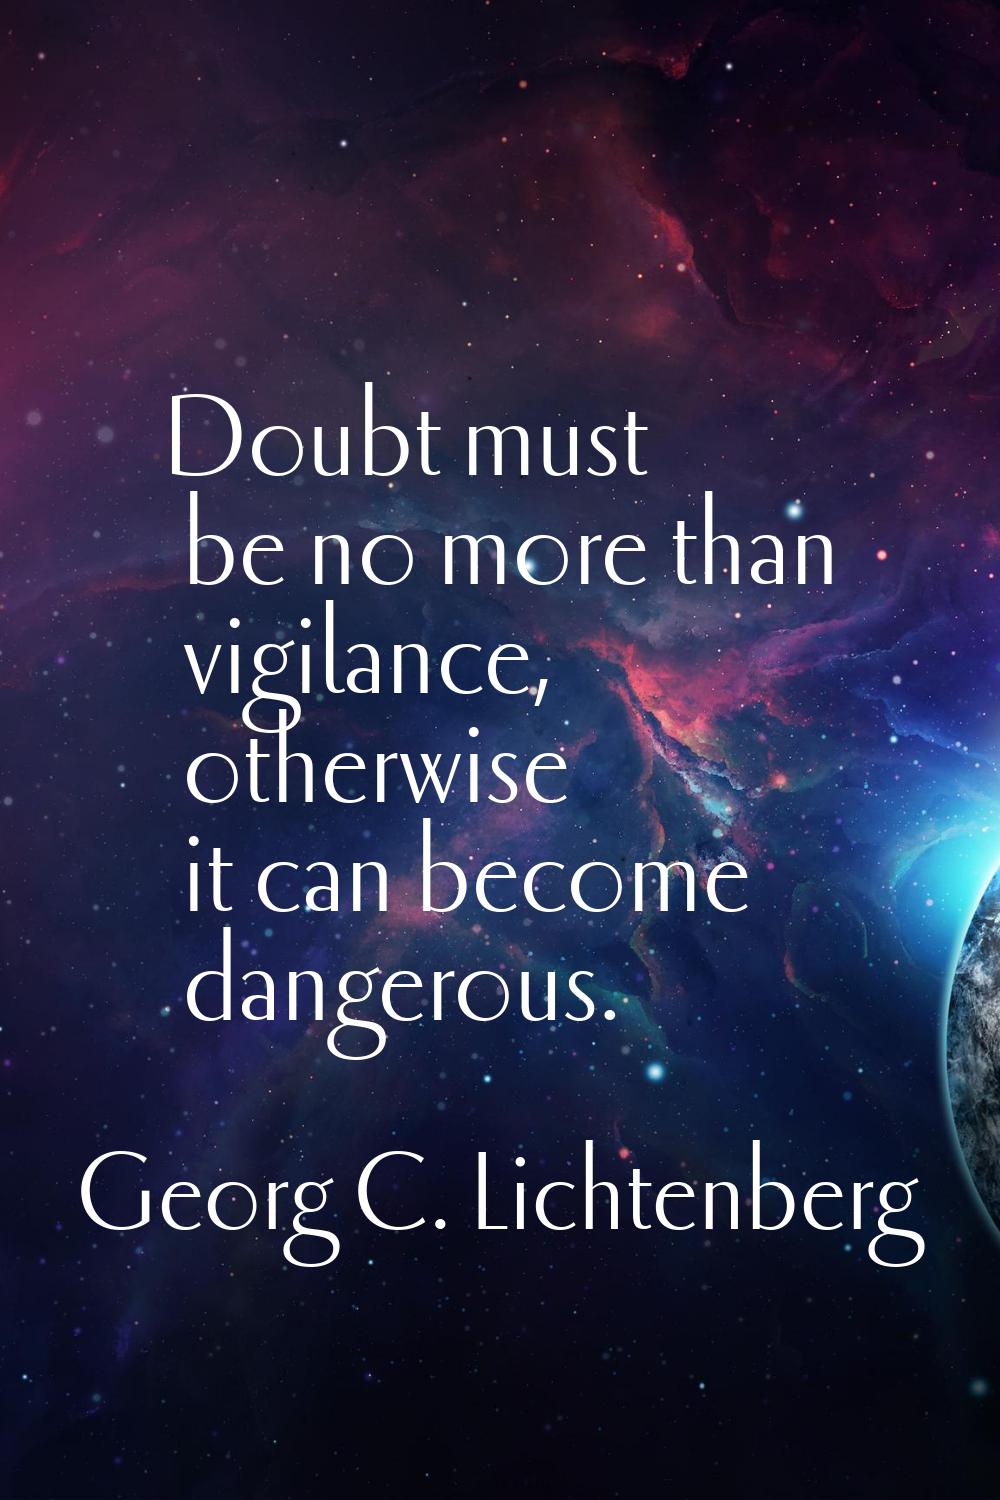 Doubt must be no more than vigilance, otherwise it can become dangerous.